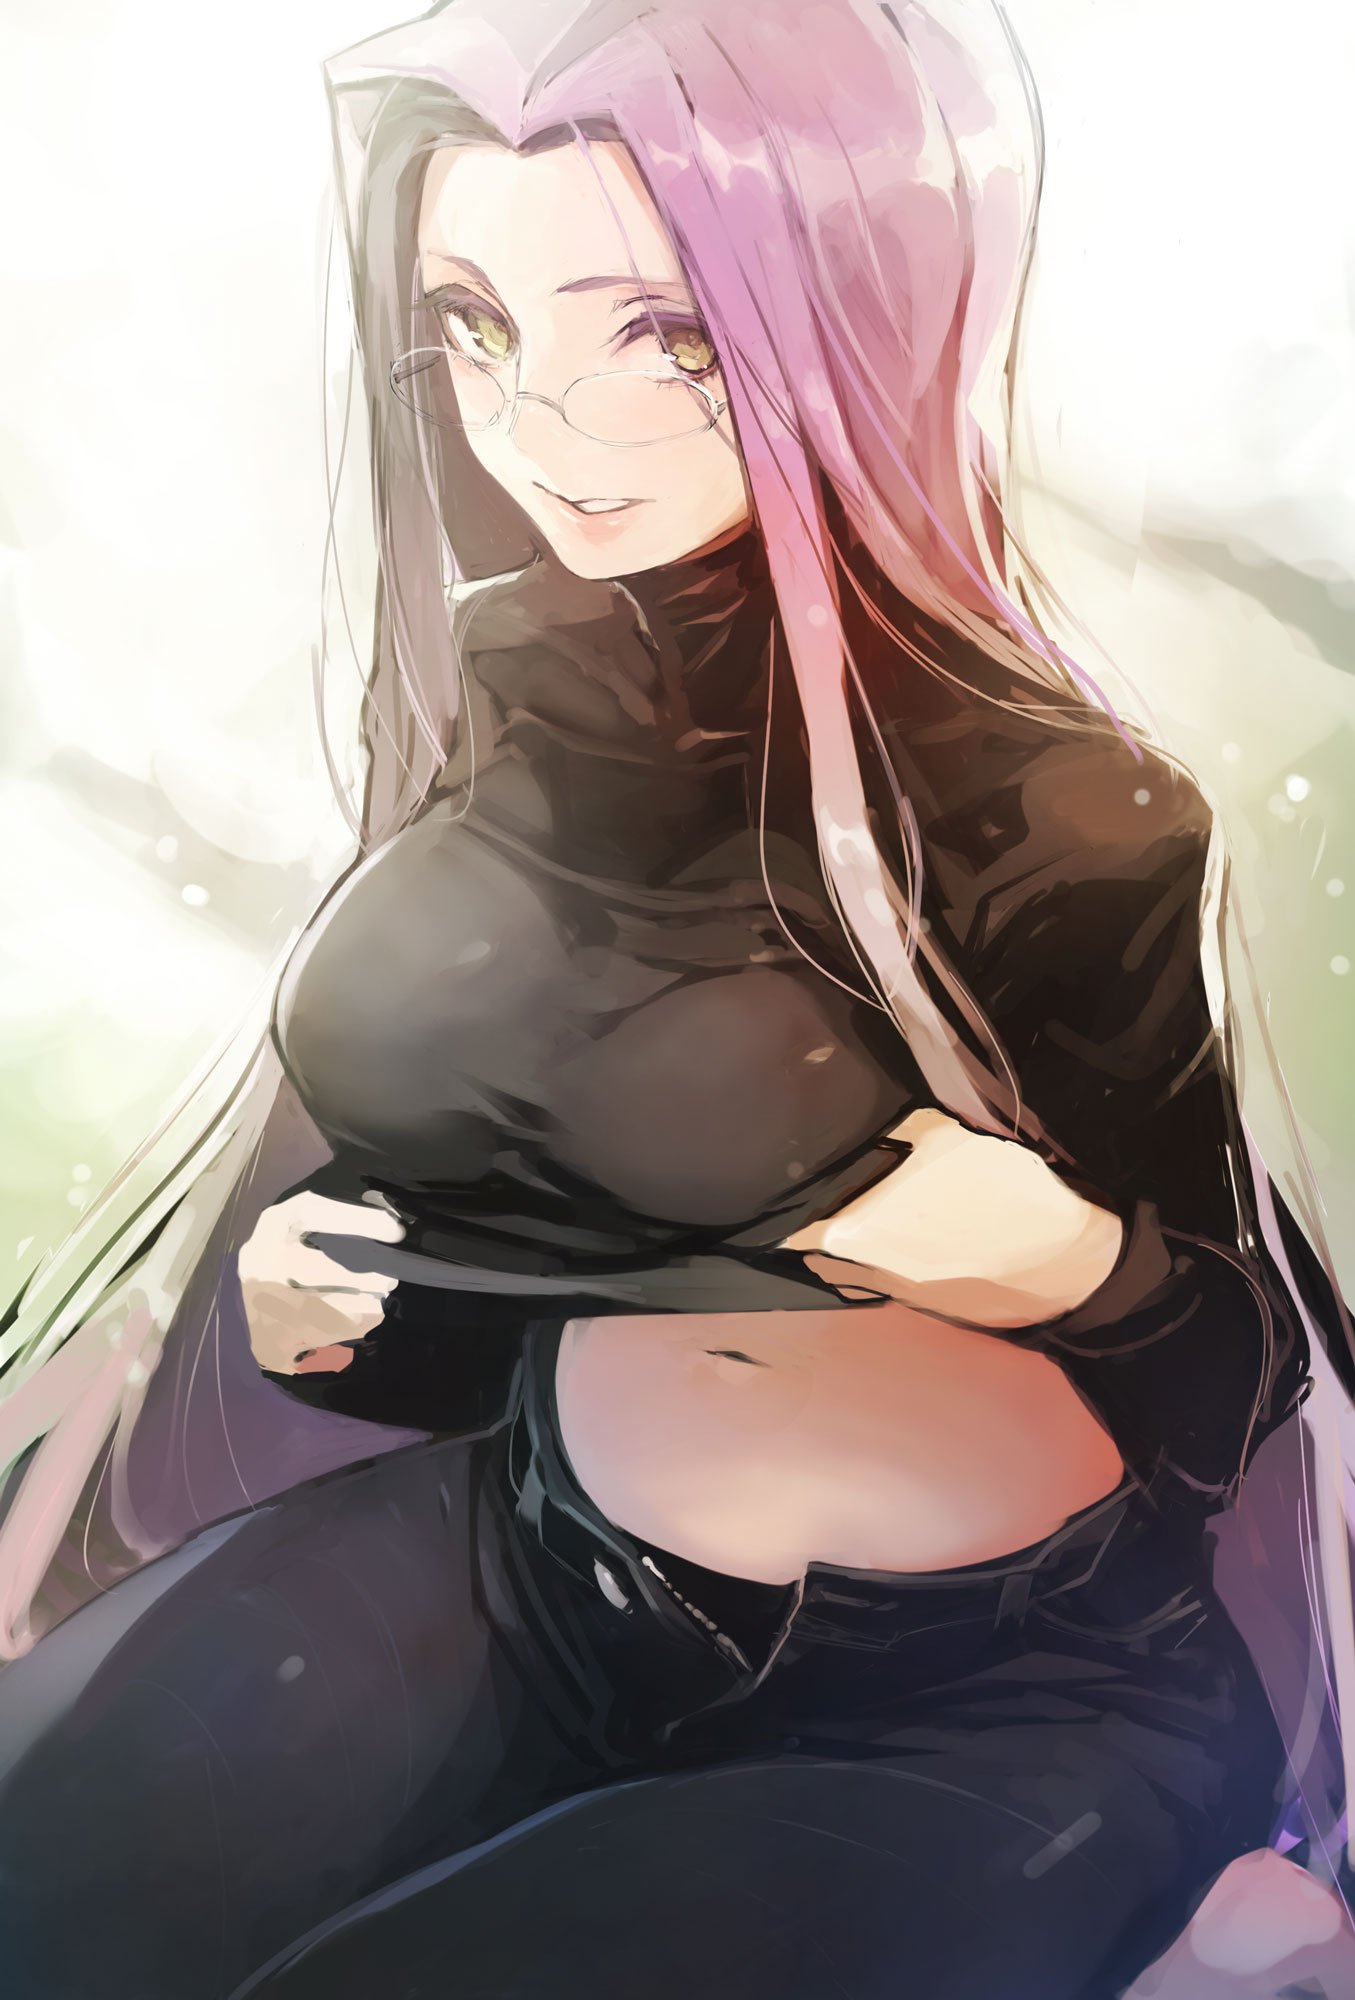 Anime 1355x2000 Fate series Fate/Stay Night fate/stay night: heaven's feel anime girls long hair purple hair yellow eyes big boobs 2D Rider (Fate/Stay Night) smiling belly button thighs black panties thick thigh looking at viewer fan art Taishi curvy lifting shirt